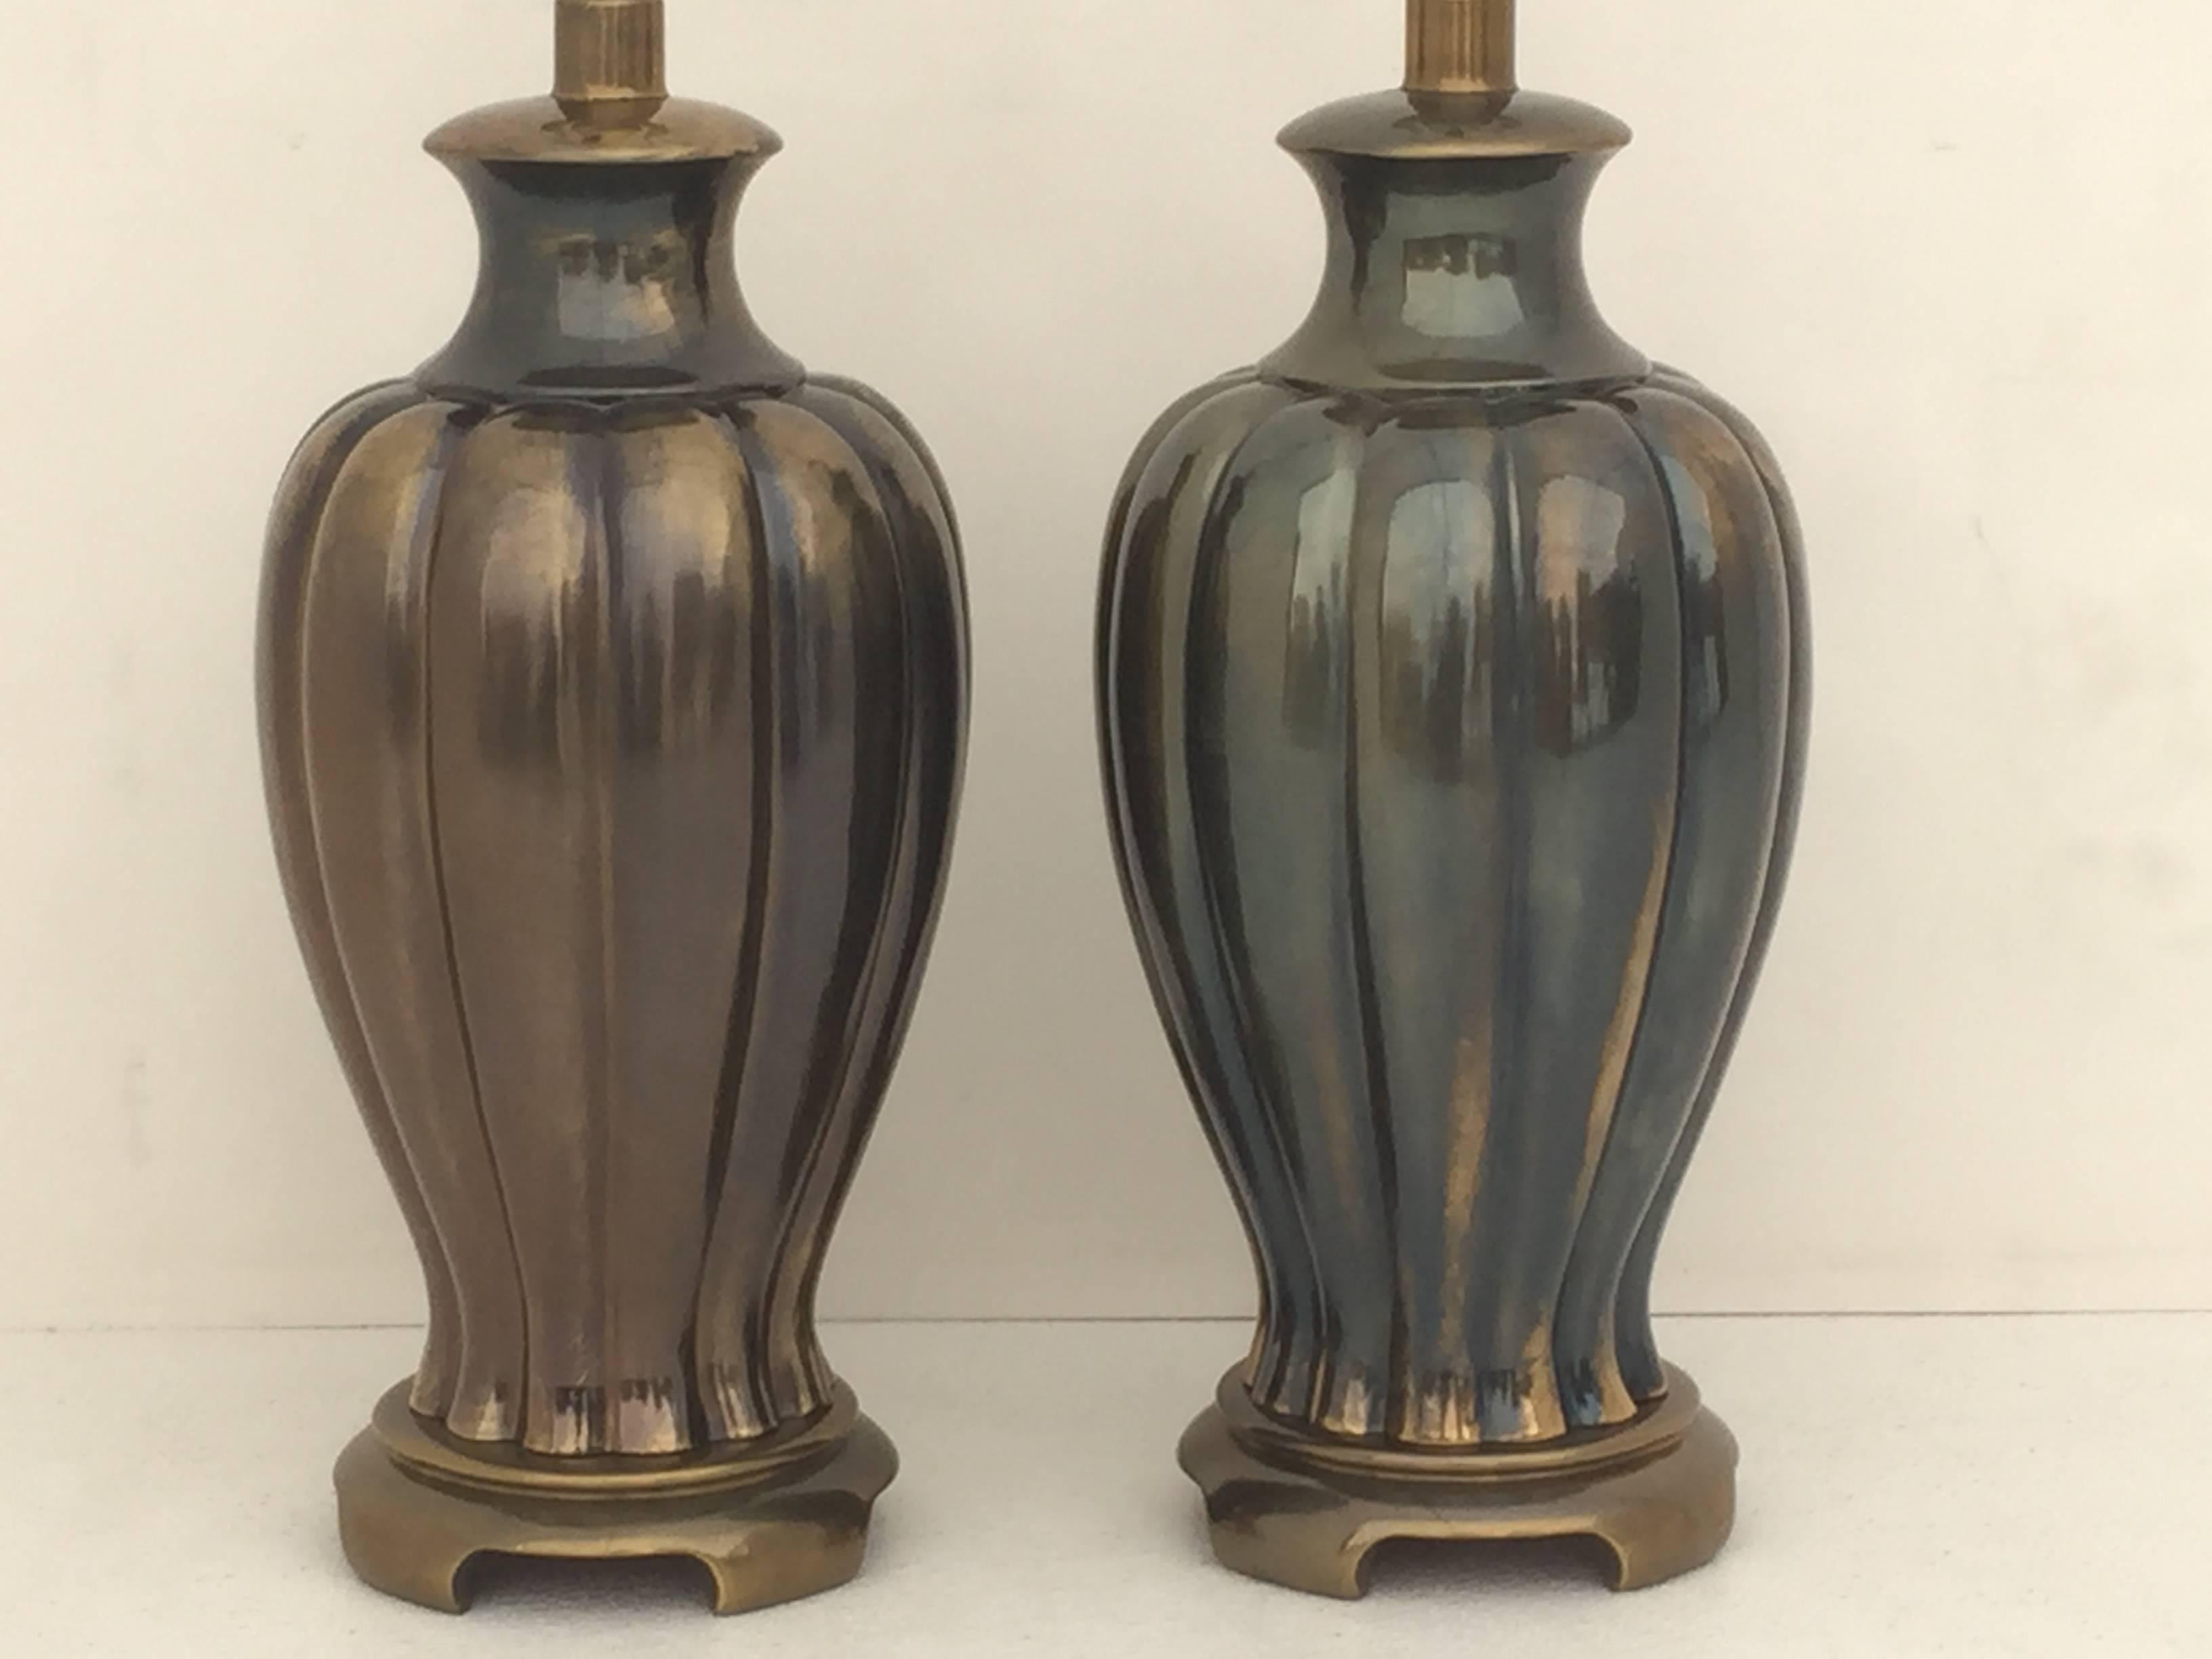 Pair of ginger jar table lamps in antique bronze finish.